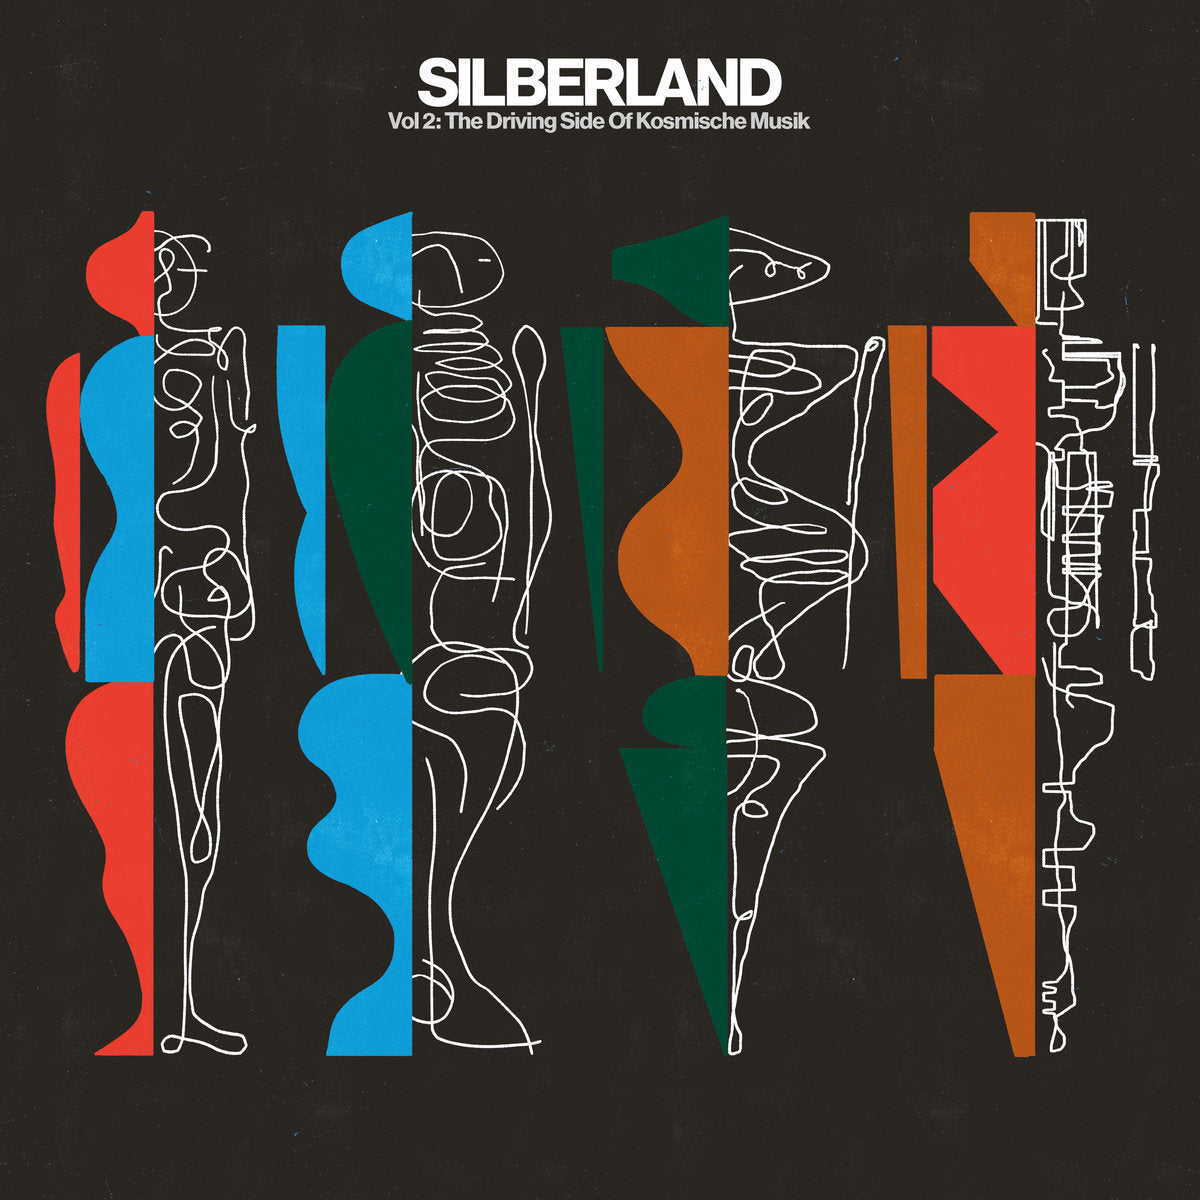 VA – Silberland Vol 2: The Driving Side Of Kosmische Musik | Buy the LP from Flying Nun